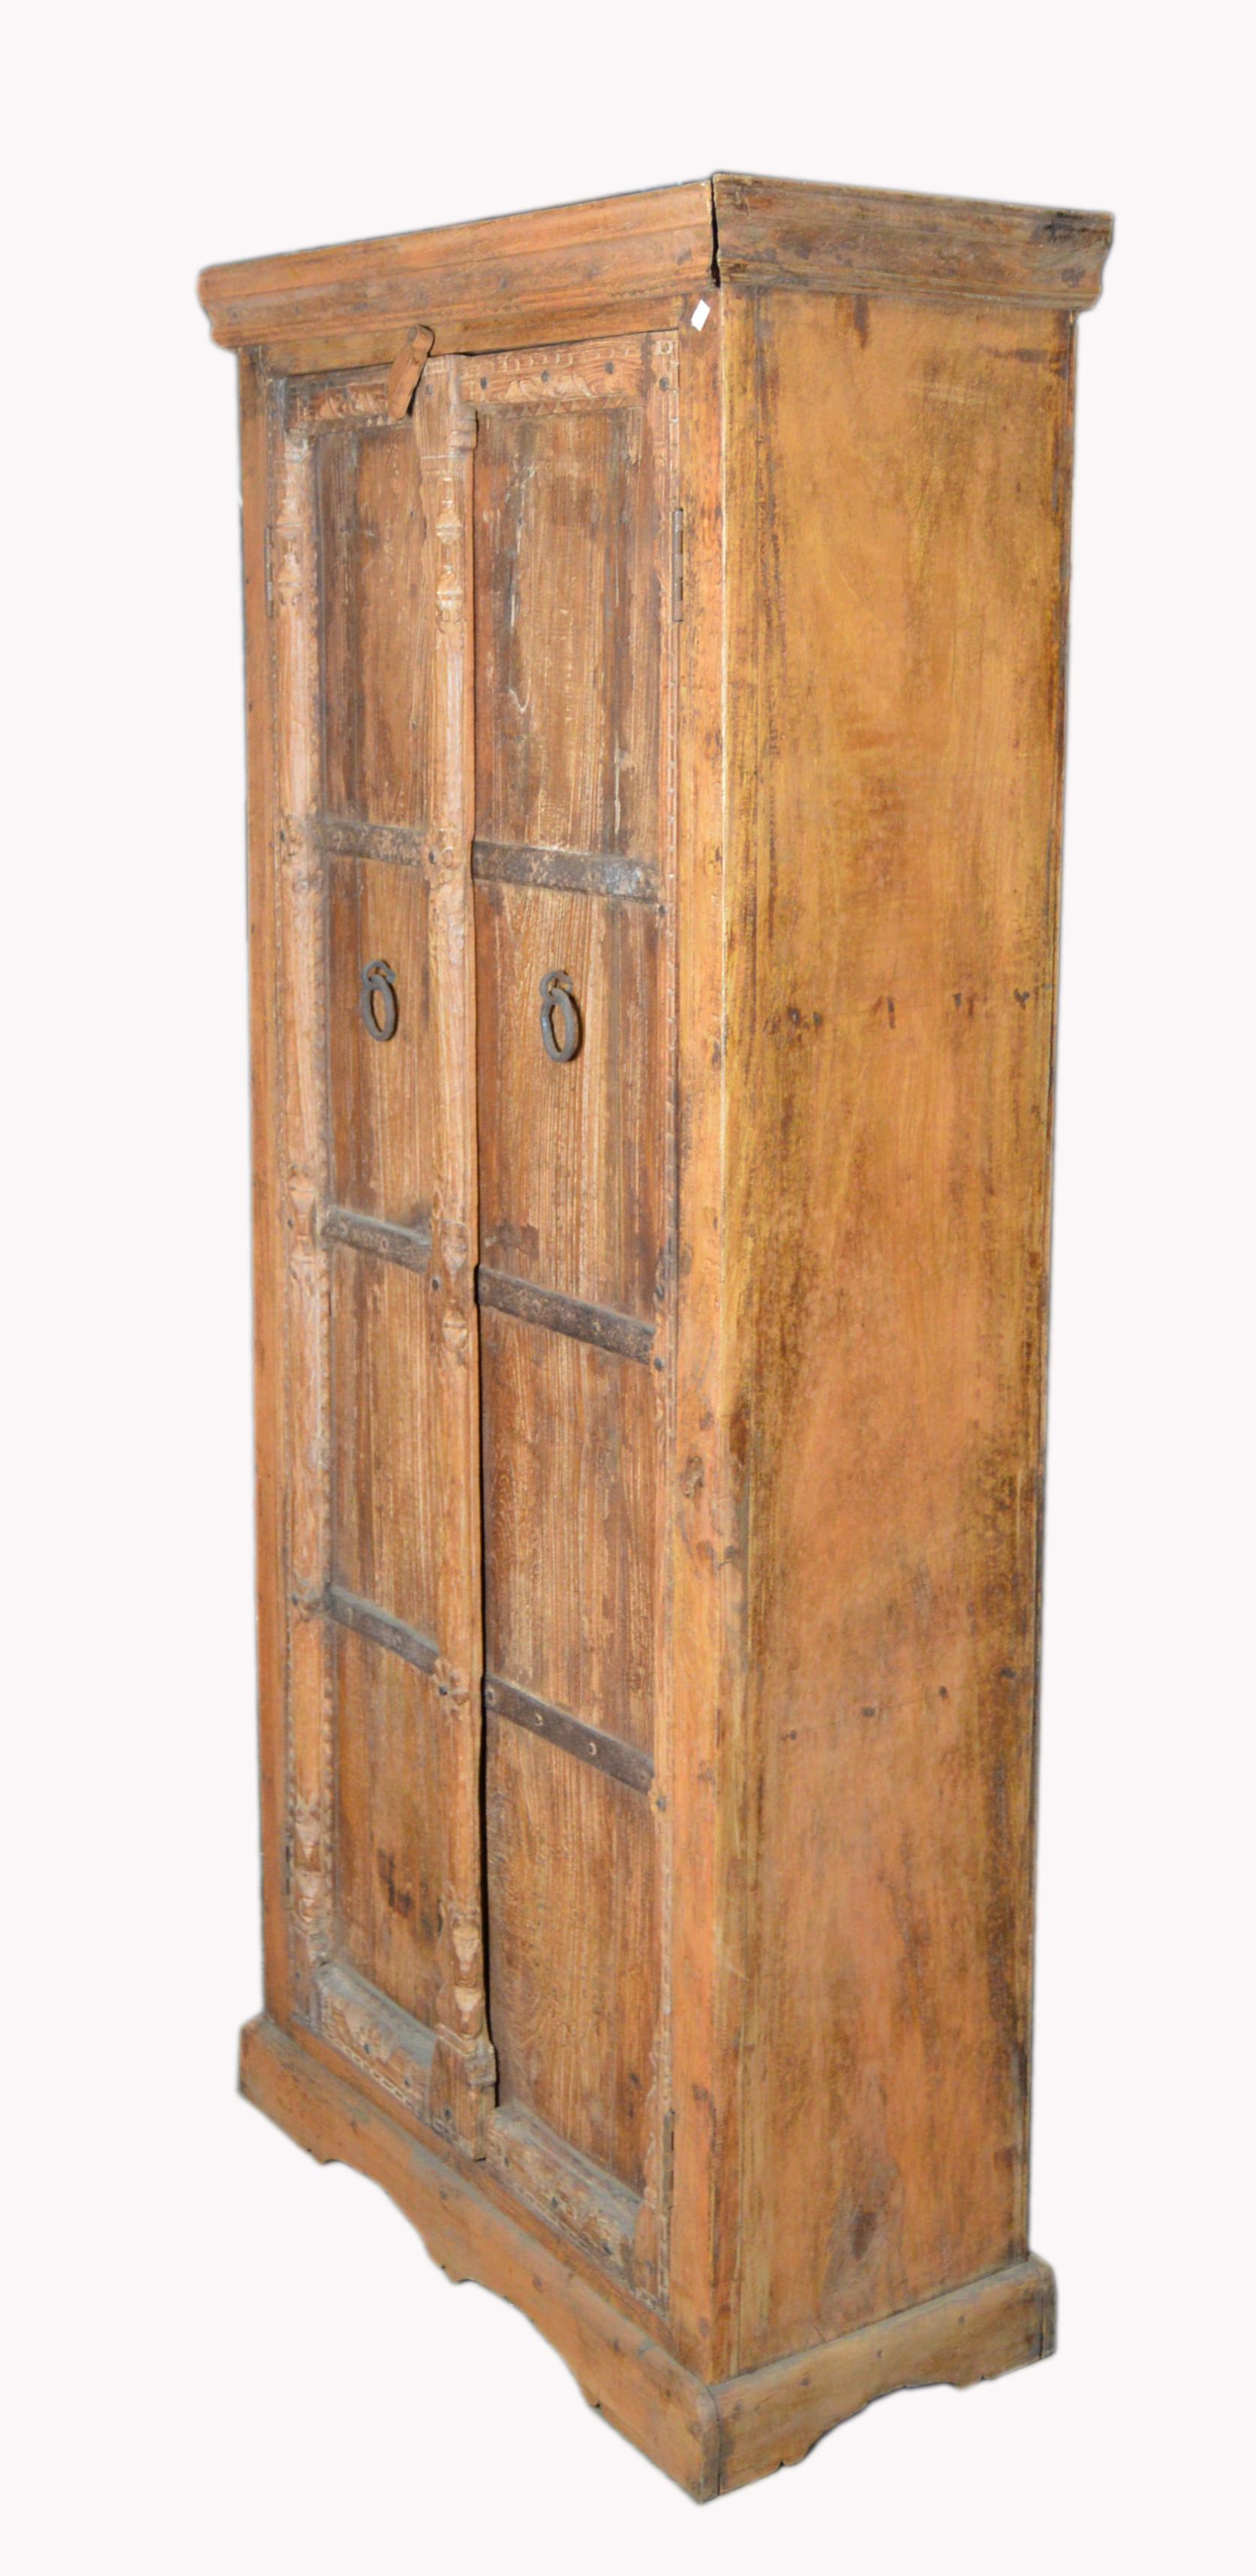 An vintage Indian wooden armoire with metal braces and brass handles. Born in India during the late-20th century, this wooden armoire features a molded cornice sitting above two elegant doors. Each door is accented with horizontal metal braces that